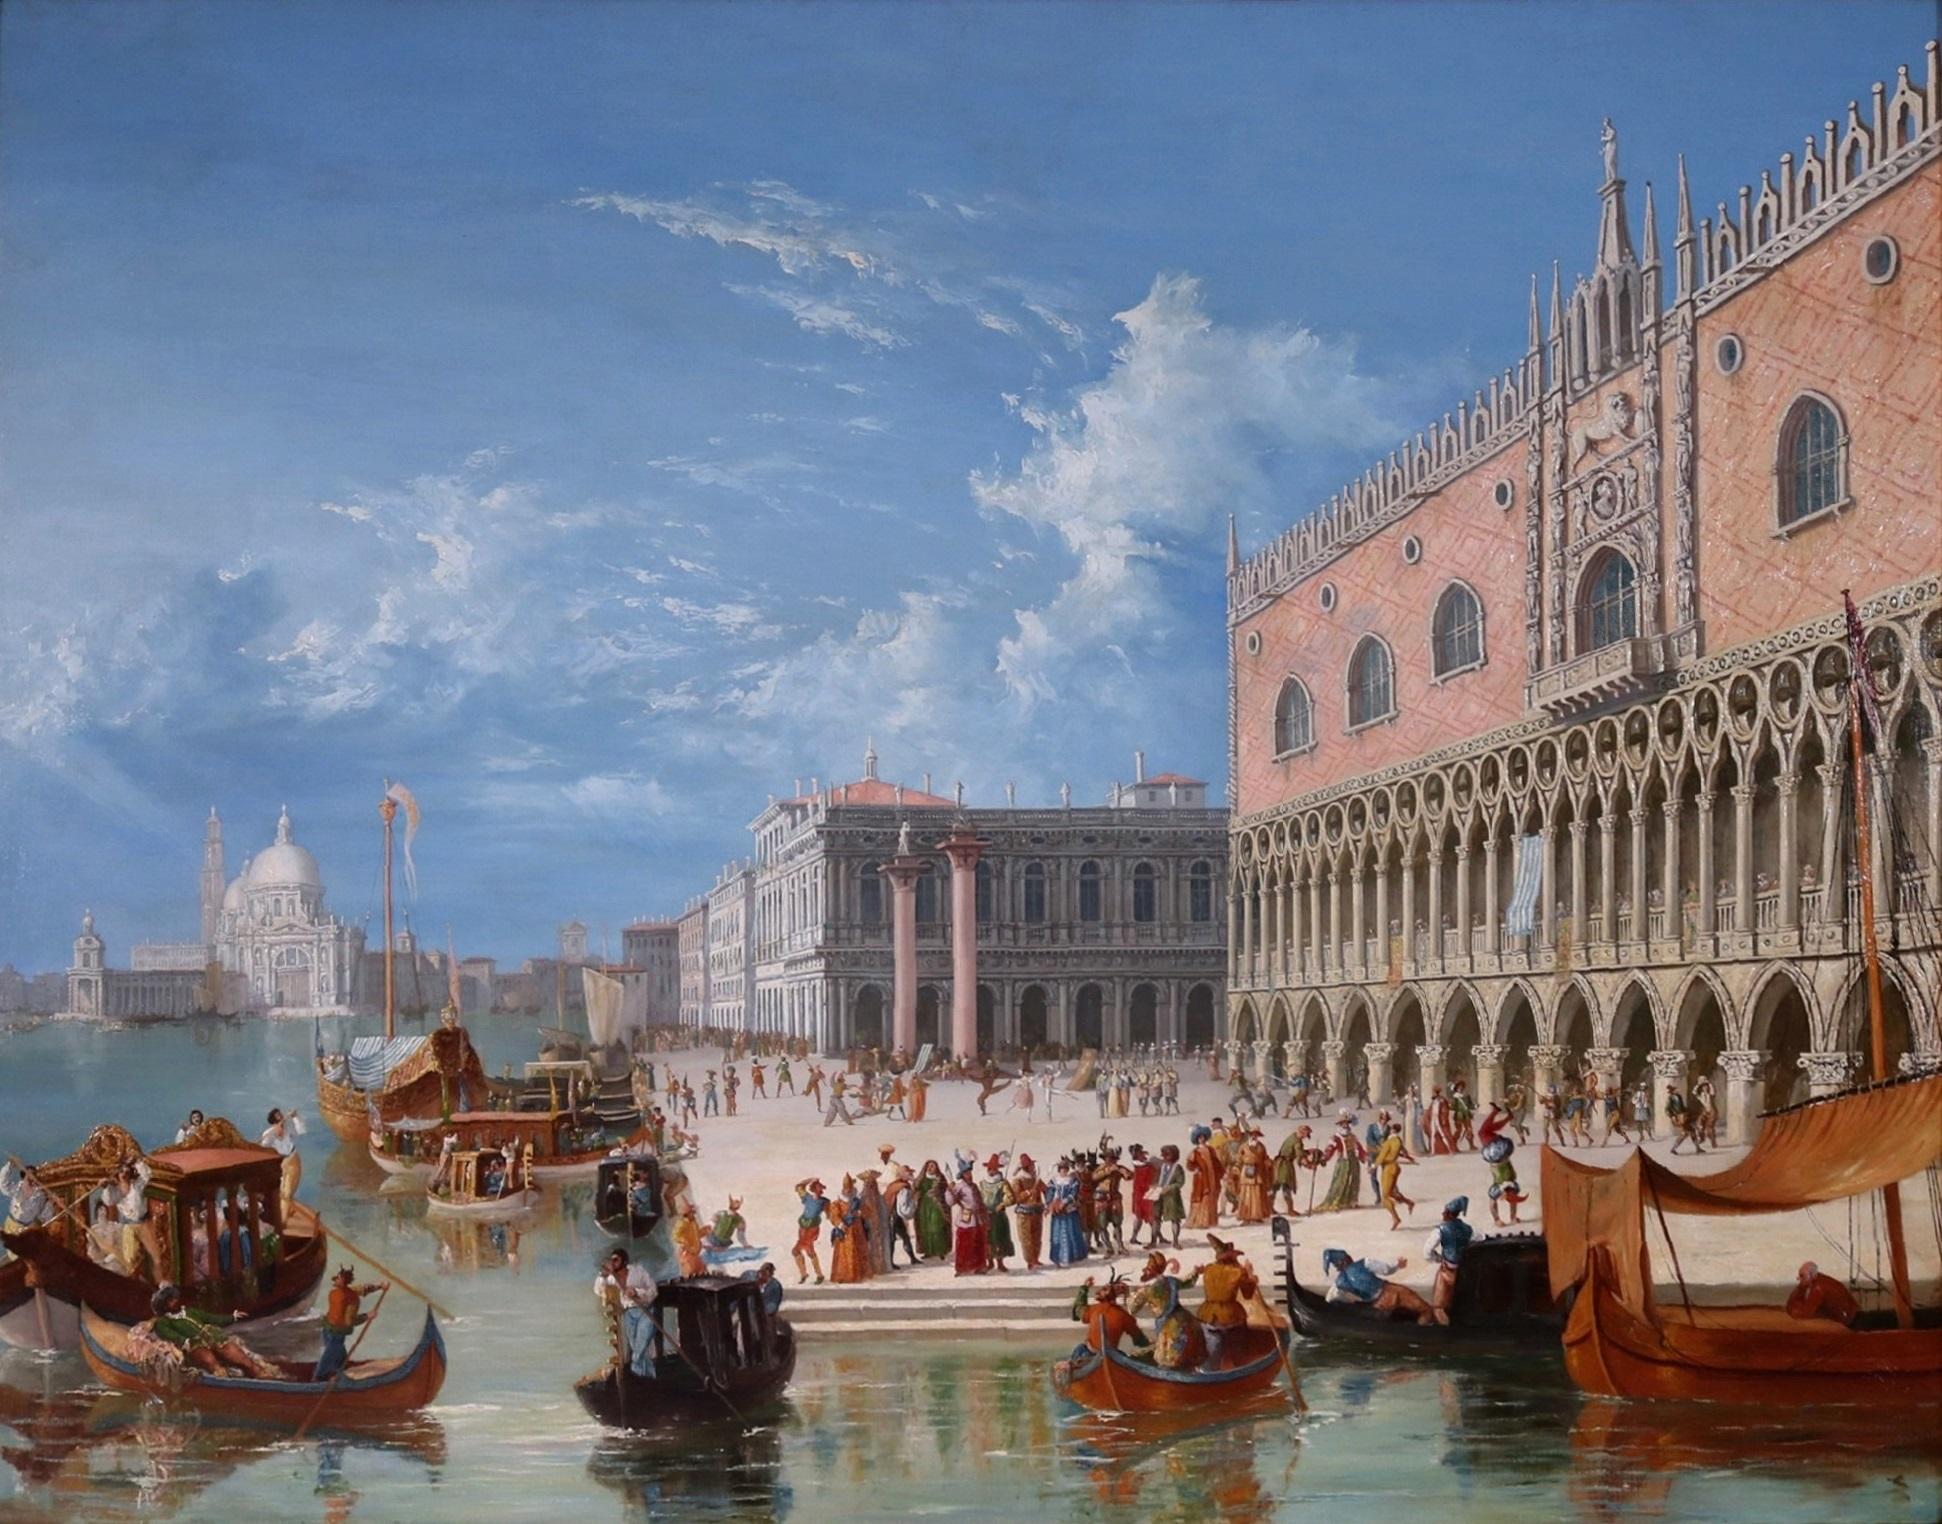 ‘Carnevale di Venezia’ by James Holland RWS (1799-1870).

The painting – which depicts an extensive view of the Grand Canal with hundreds of masked revellers before the Ducal Palace at the entrance to St. Mark’s Square – hangs in a fine quality gold